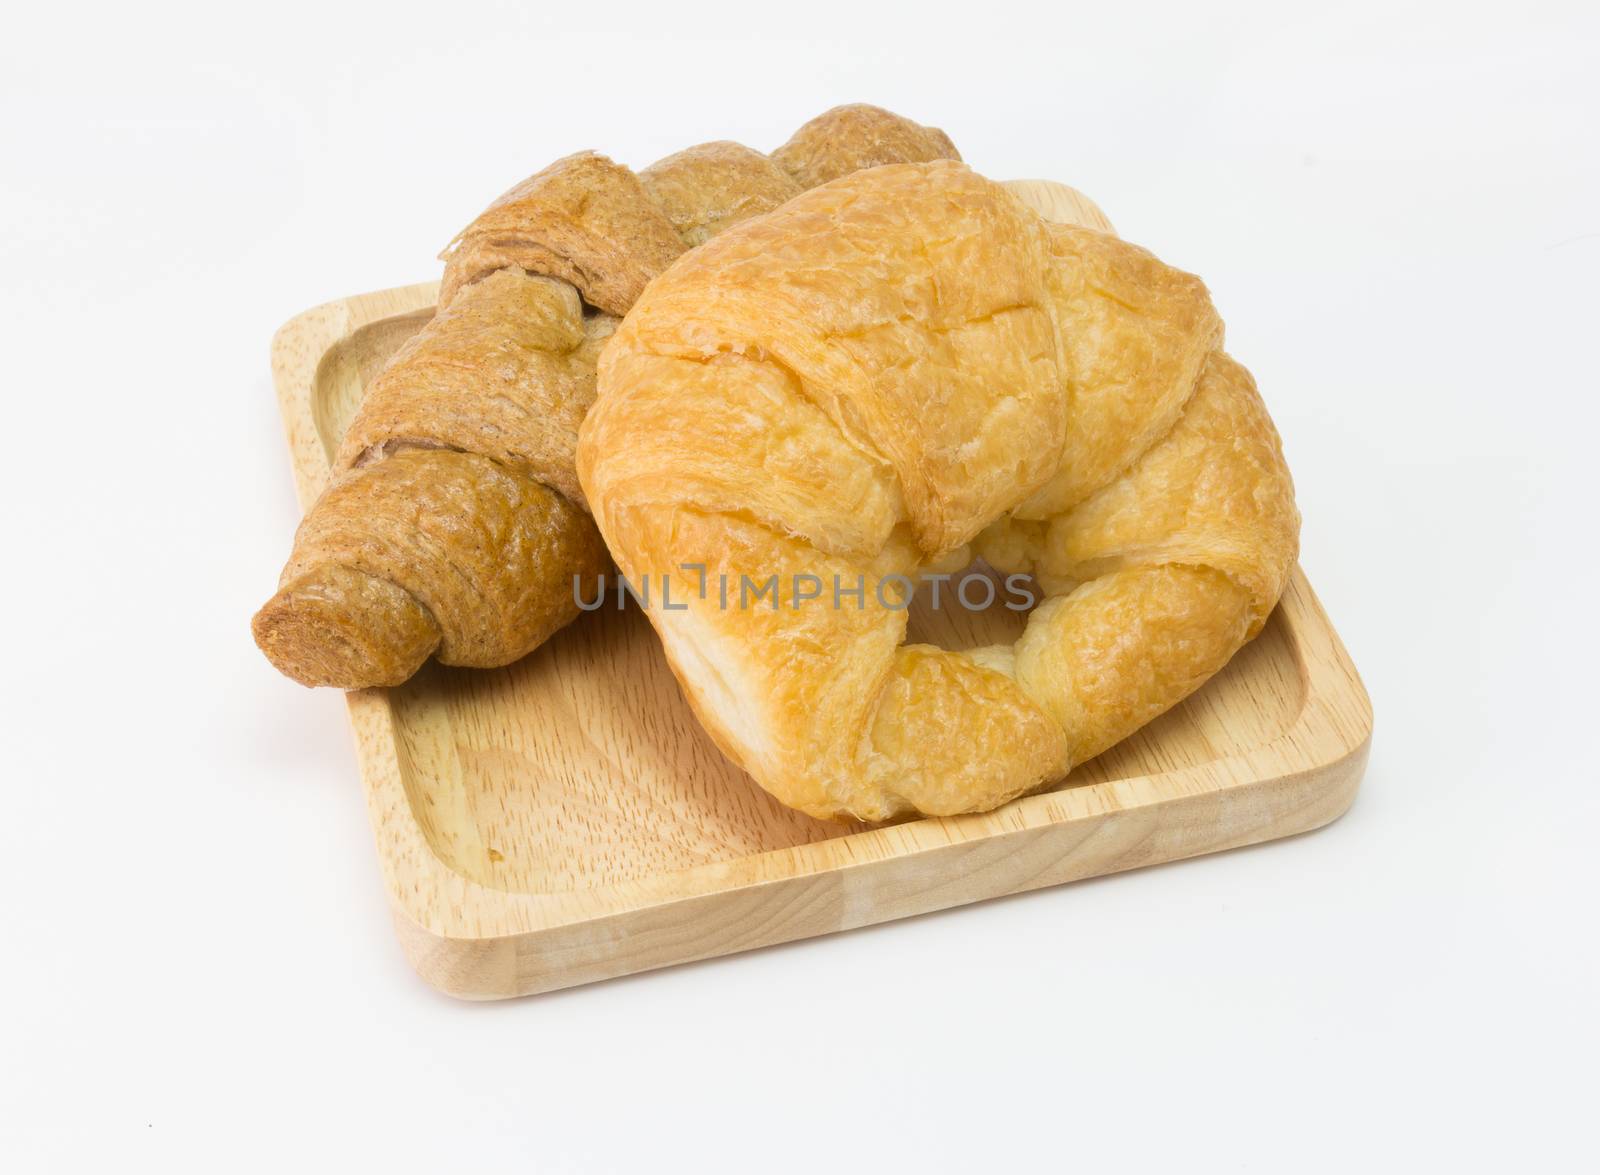 Croissant bread, france Croissant isolated on white background by chingraph